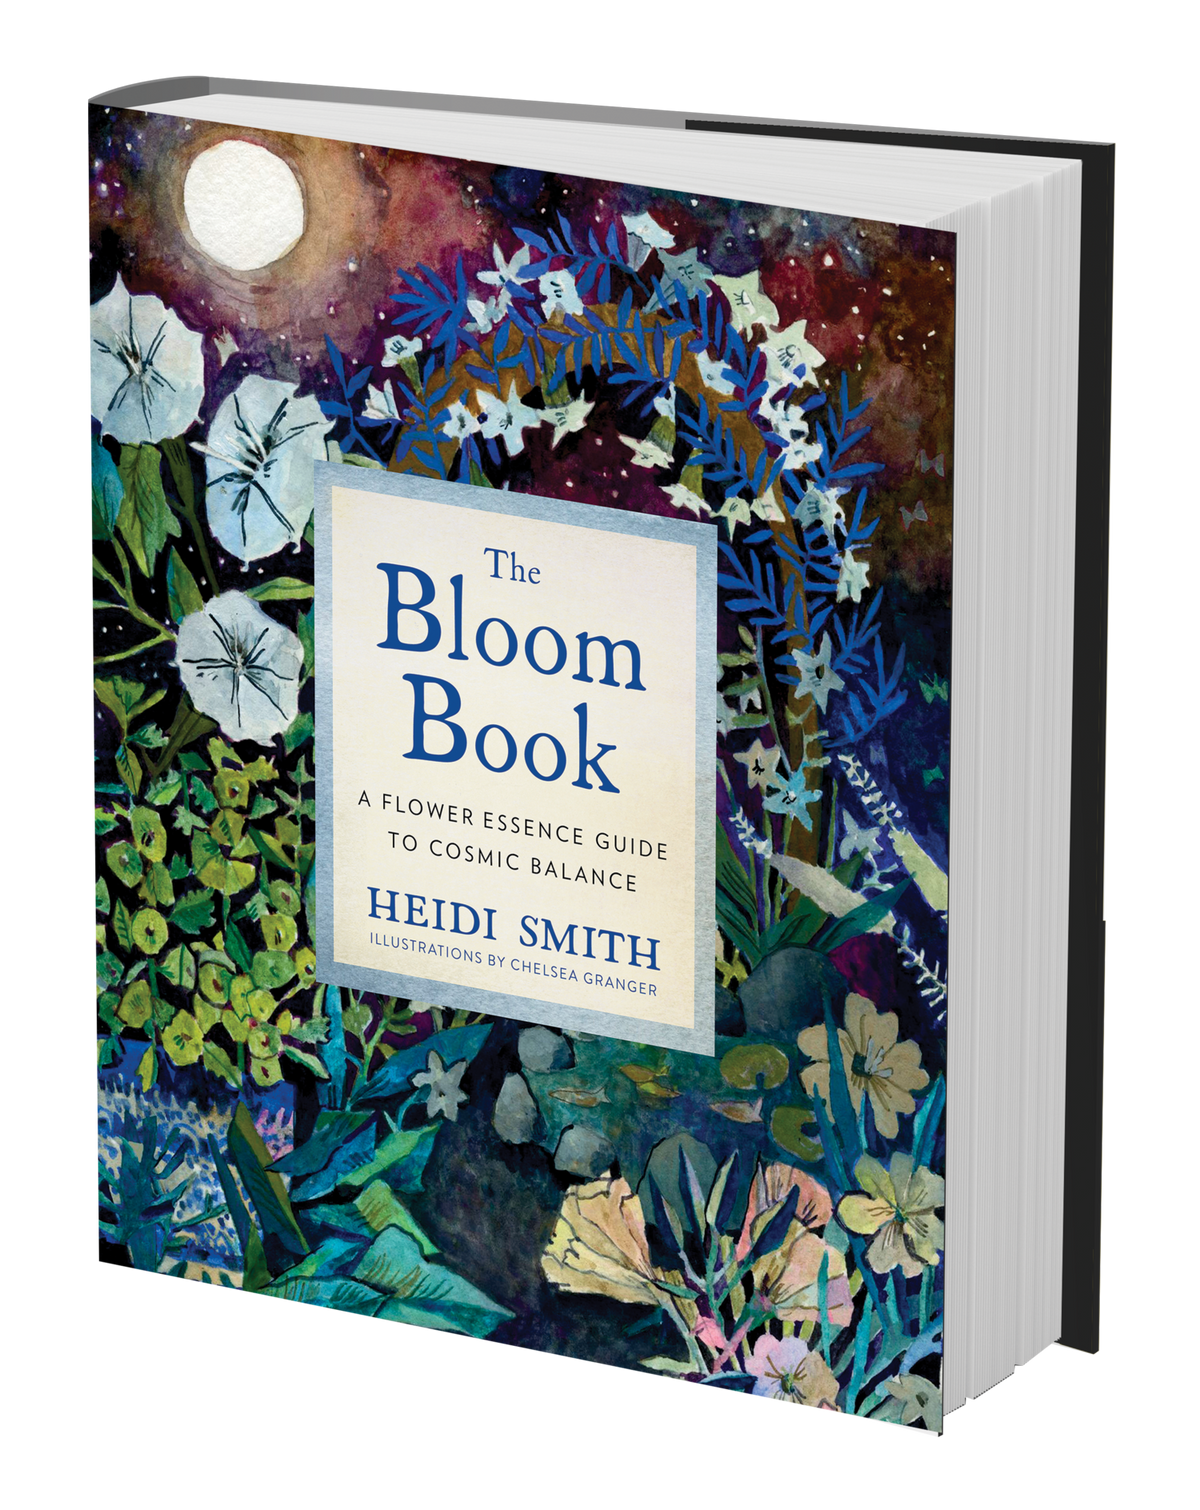 The Bloom Book by Heidi Smith